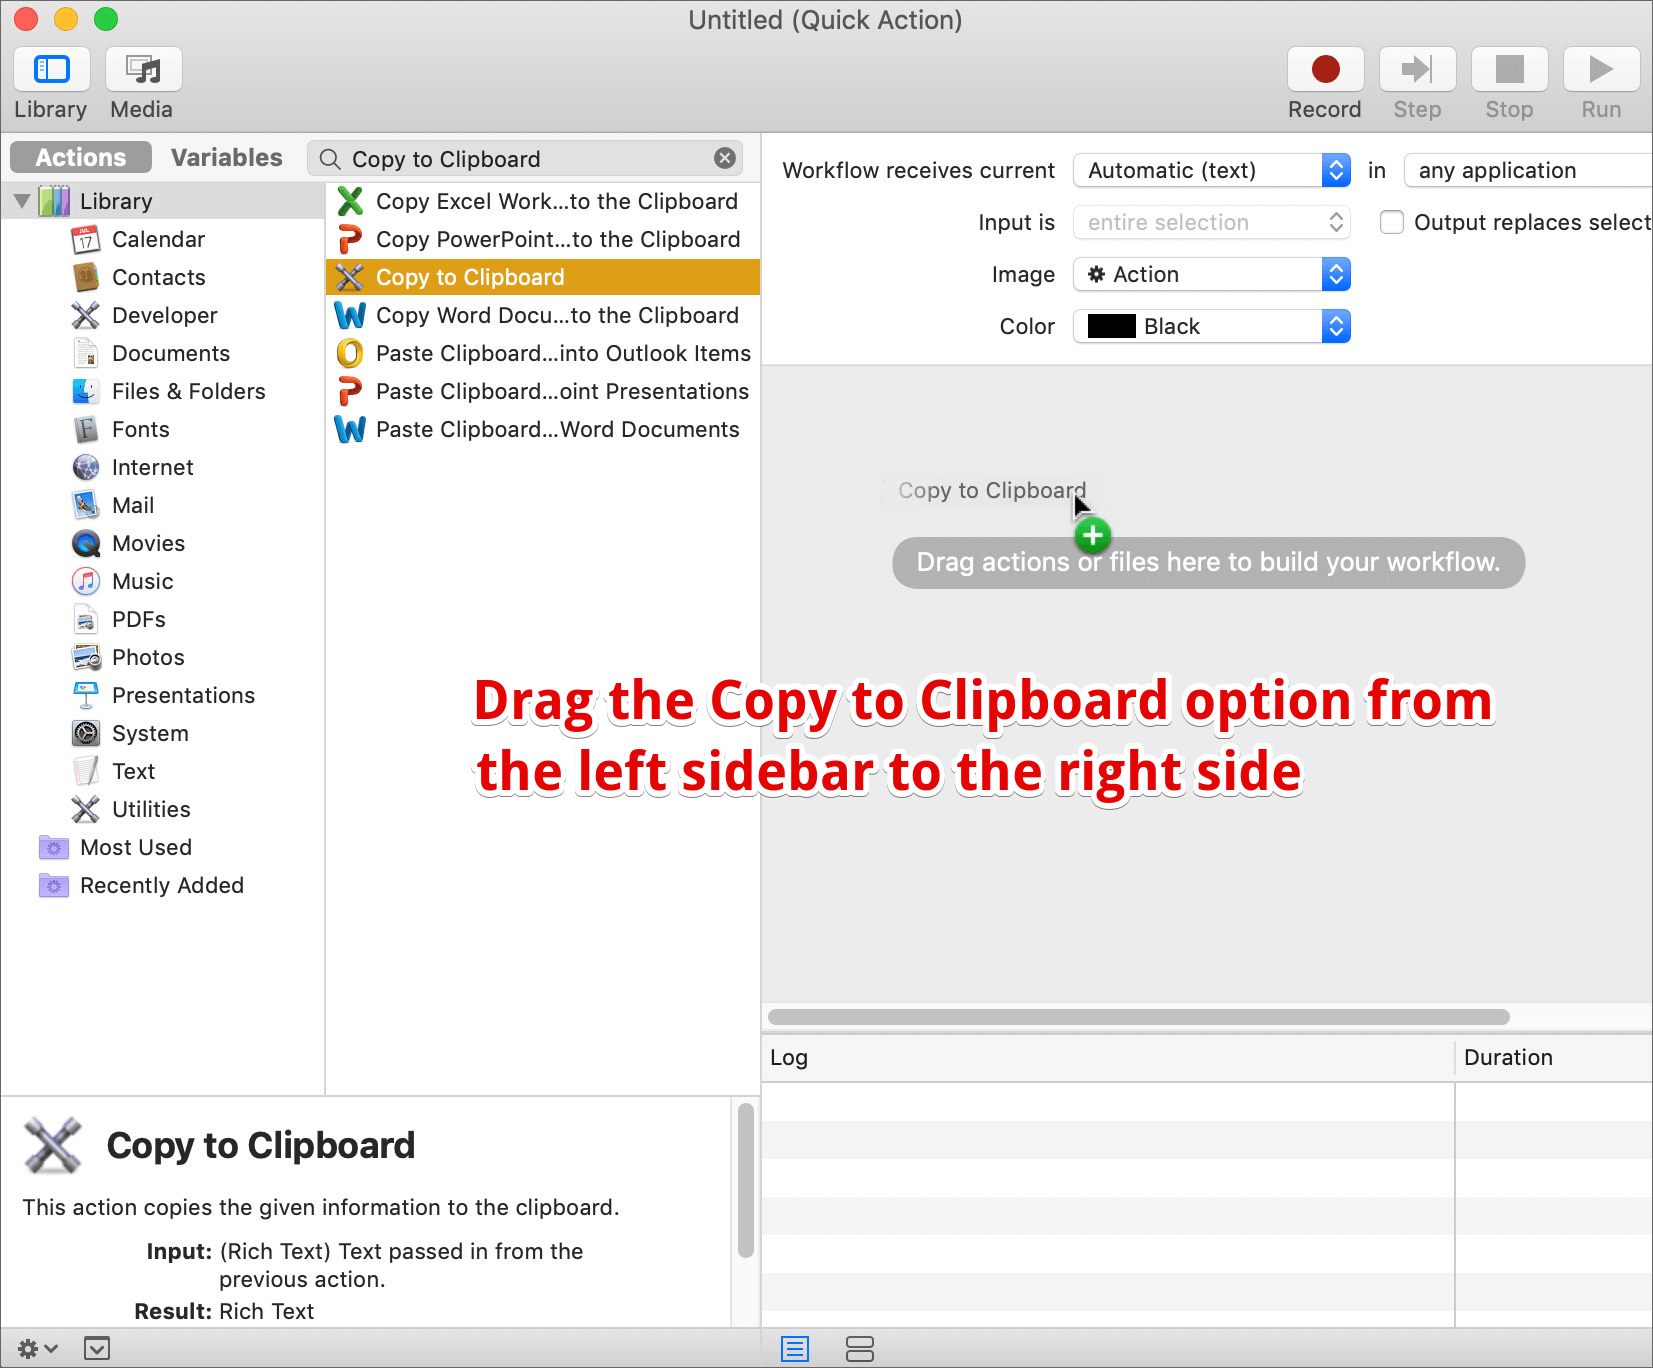 Drag the Copy to Clipboard option from left sidebar to the right sidebar in Mac Automator App